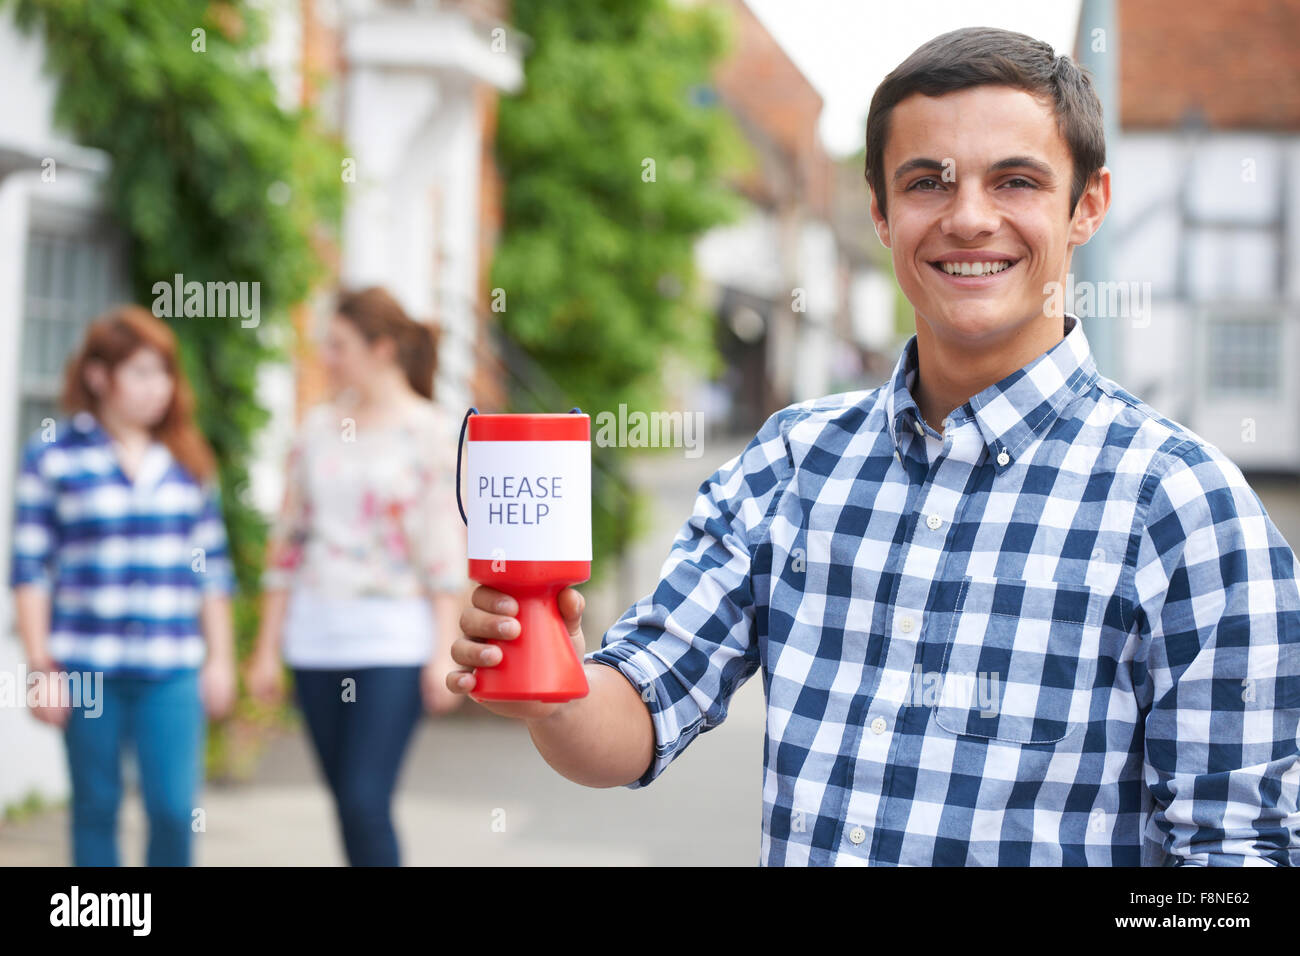 Teenage Boy Collecting For Charity In Street Stock Photo